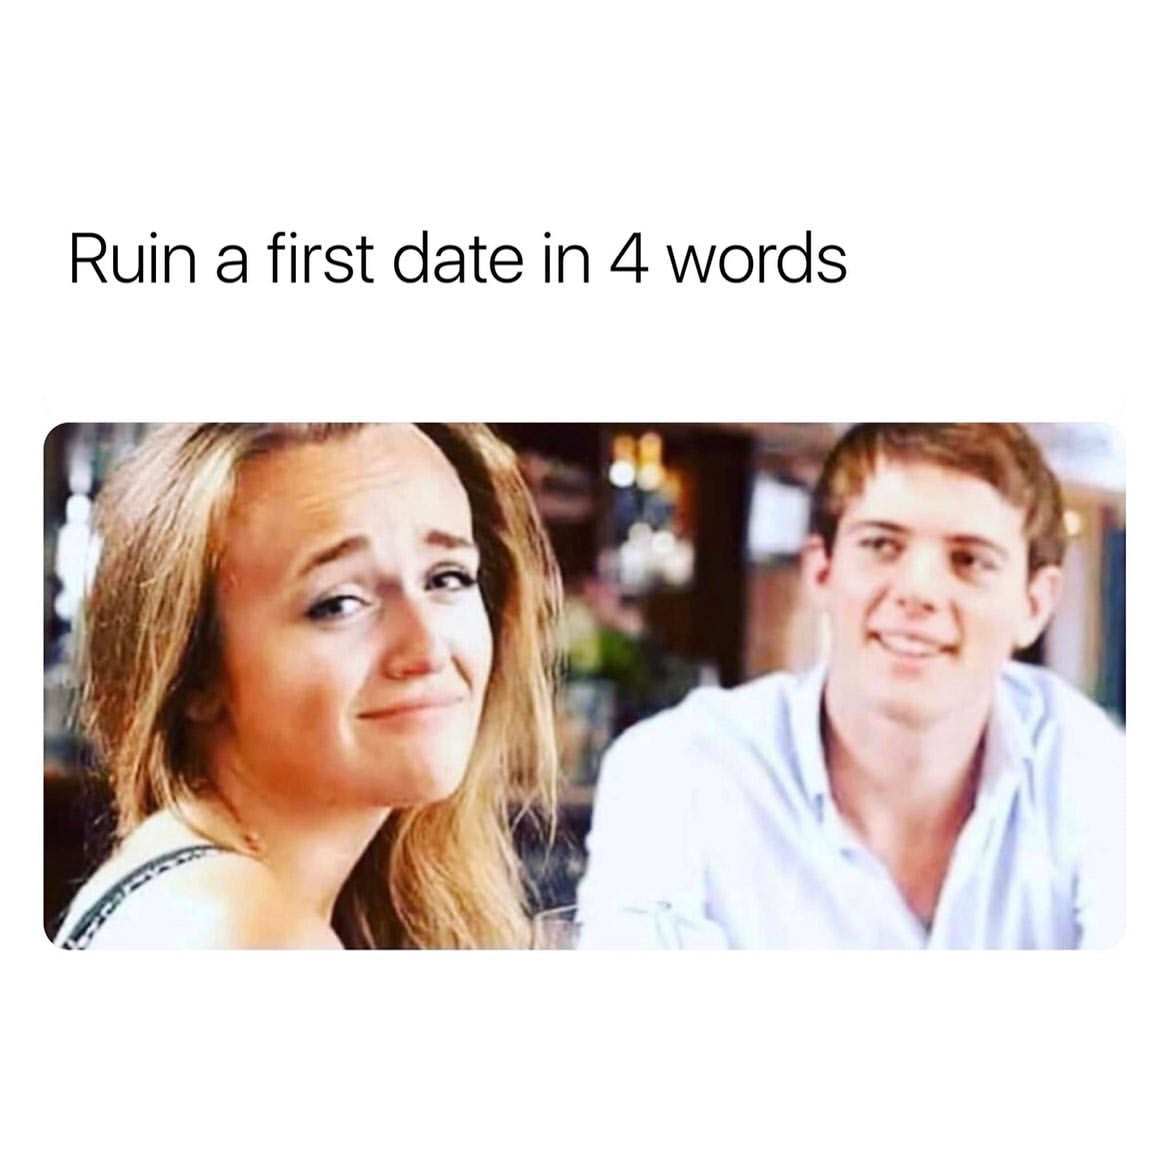 Ruin a first date in 4 words.